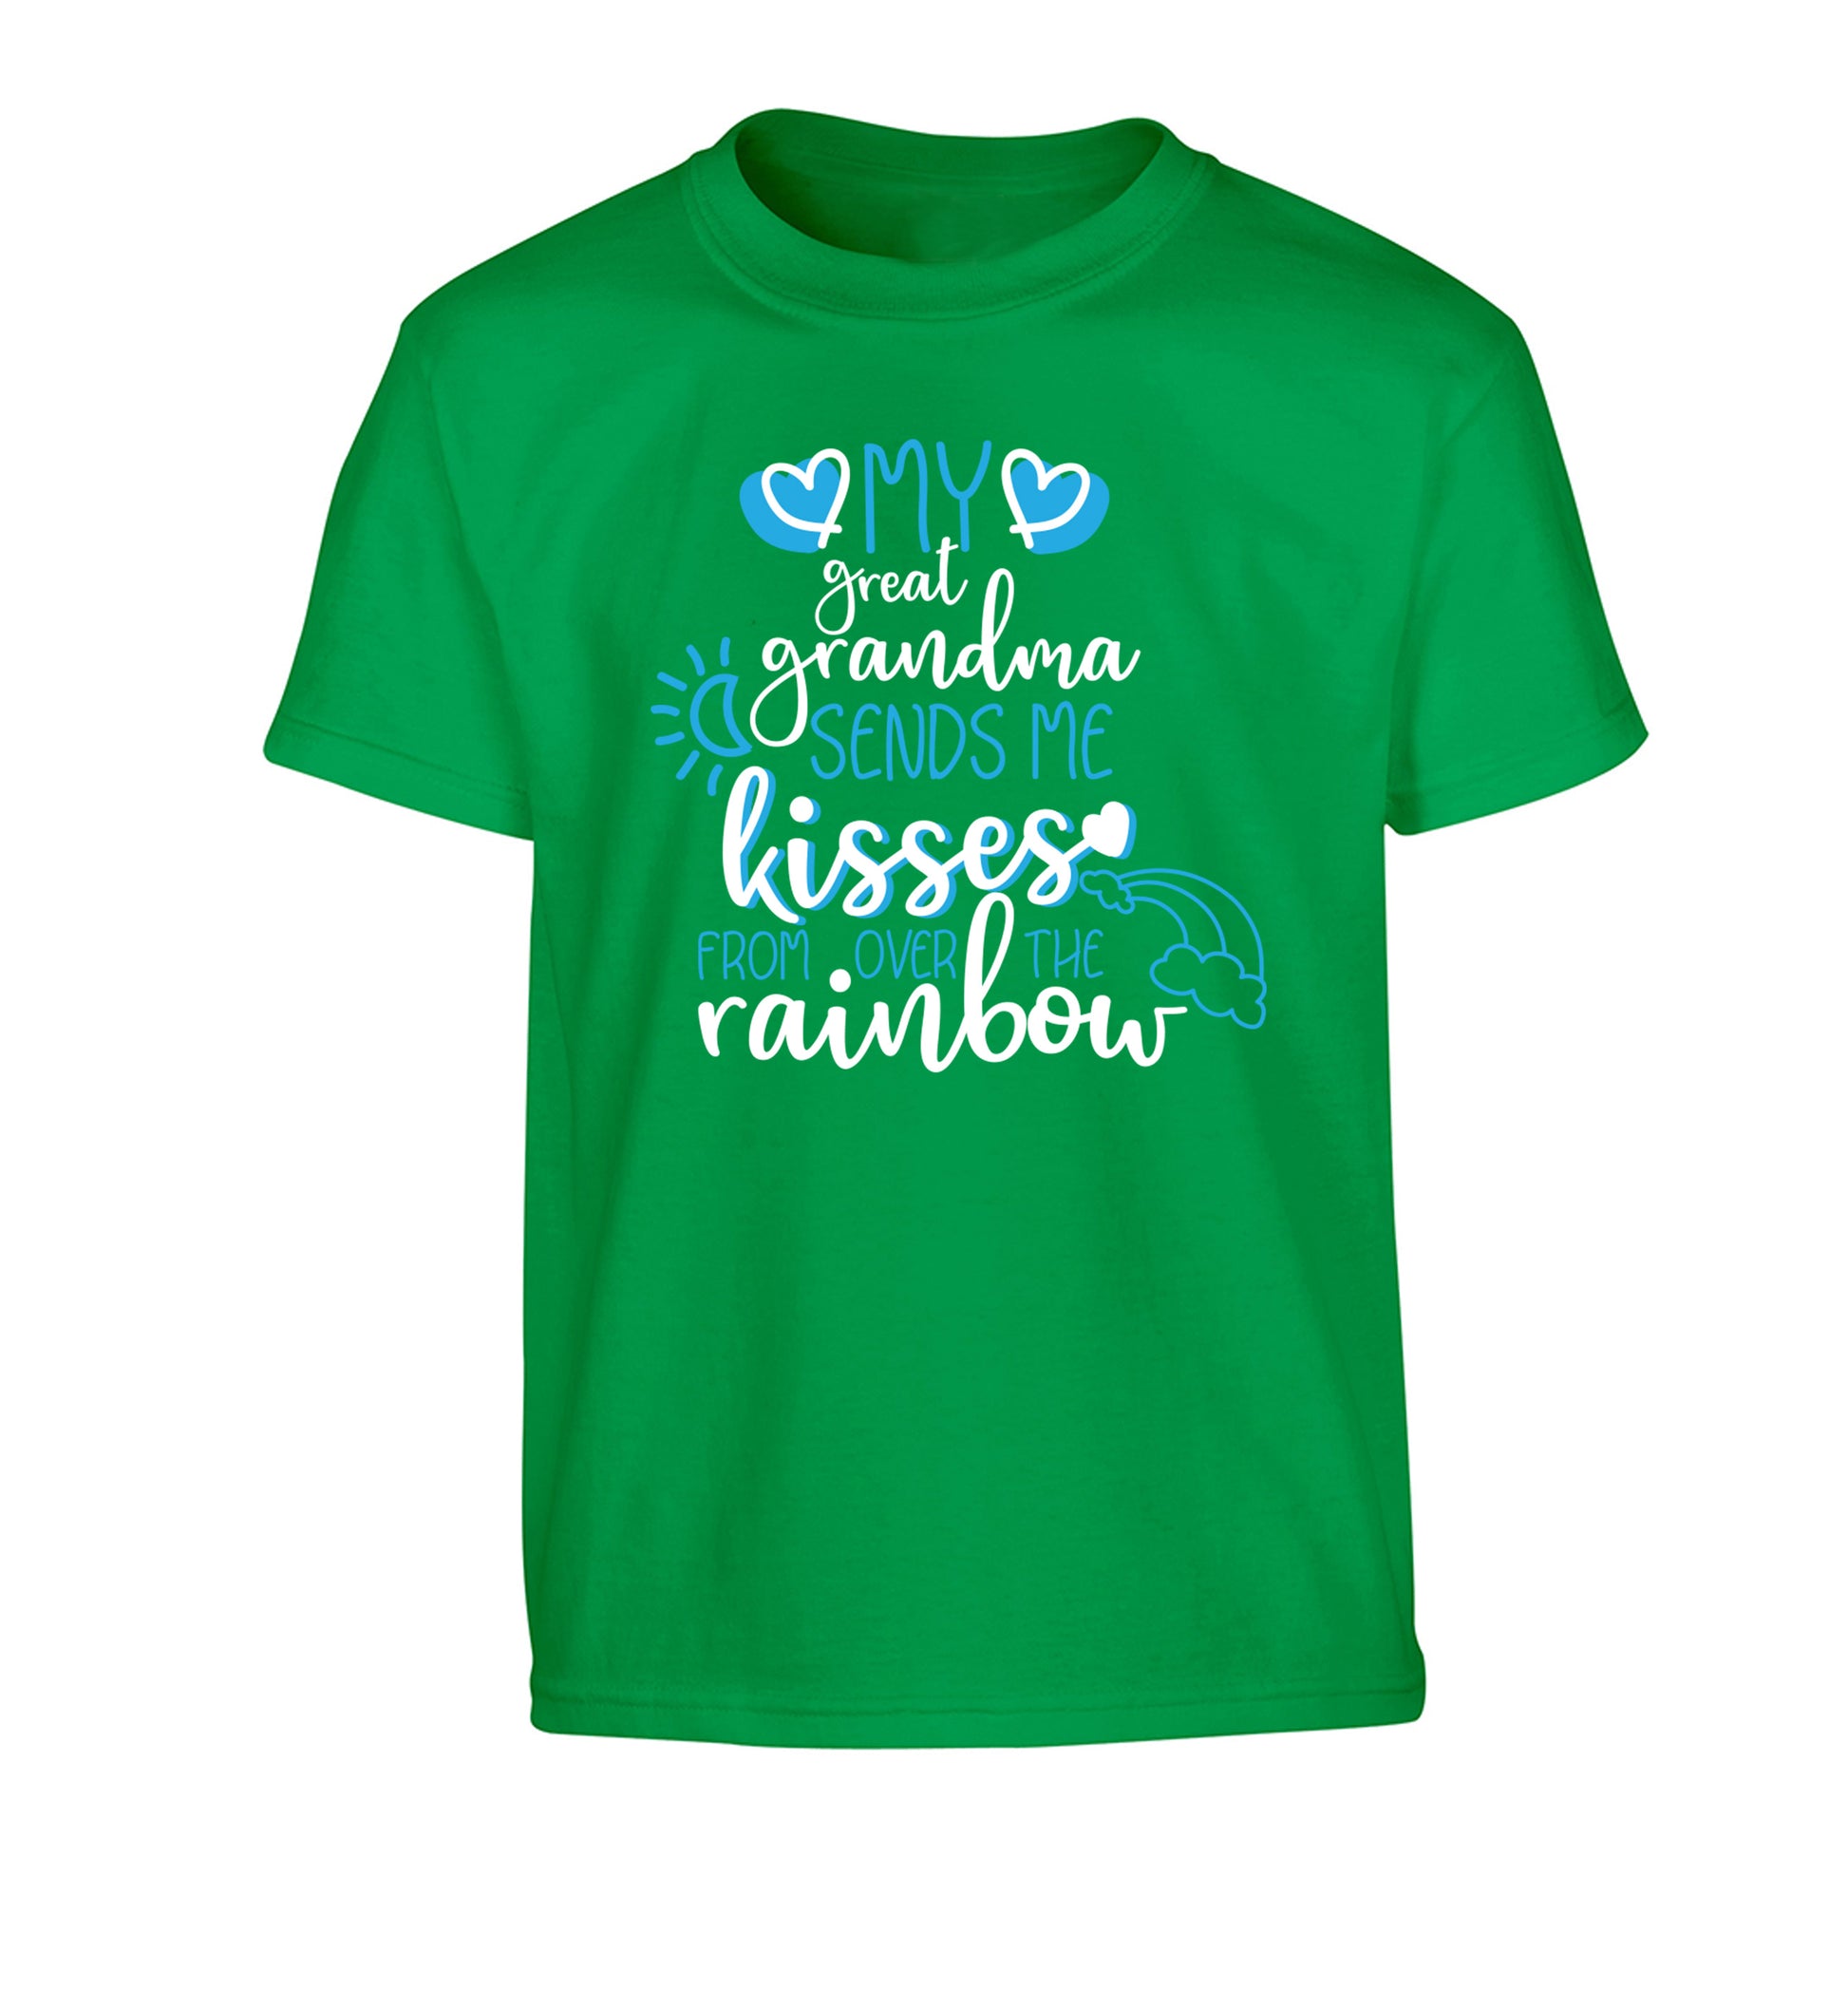 My great grandma sends me kisses from over the rainbow Children's green Tshirt 12-13 Years